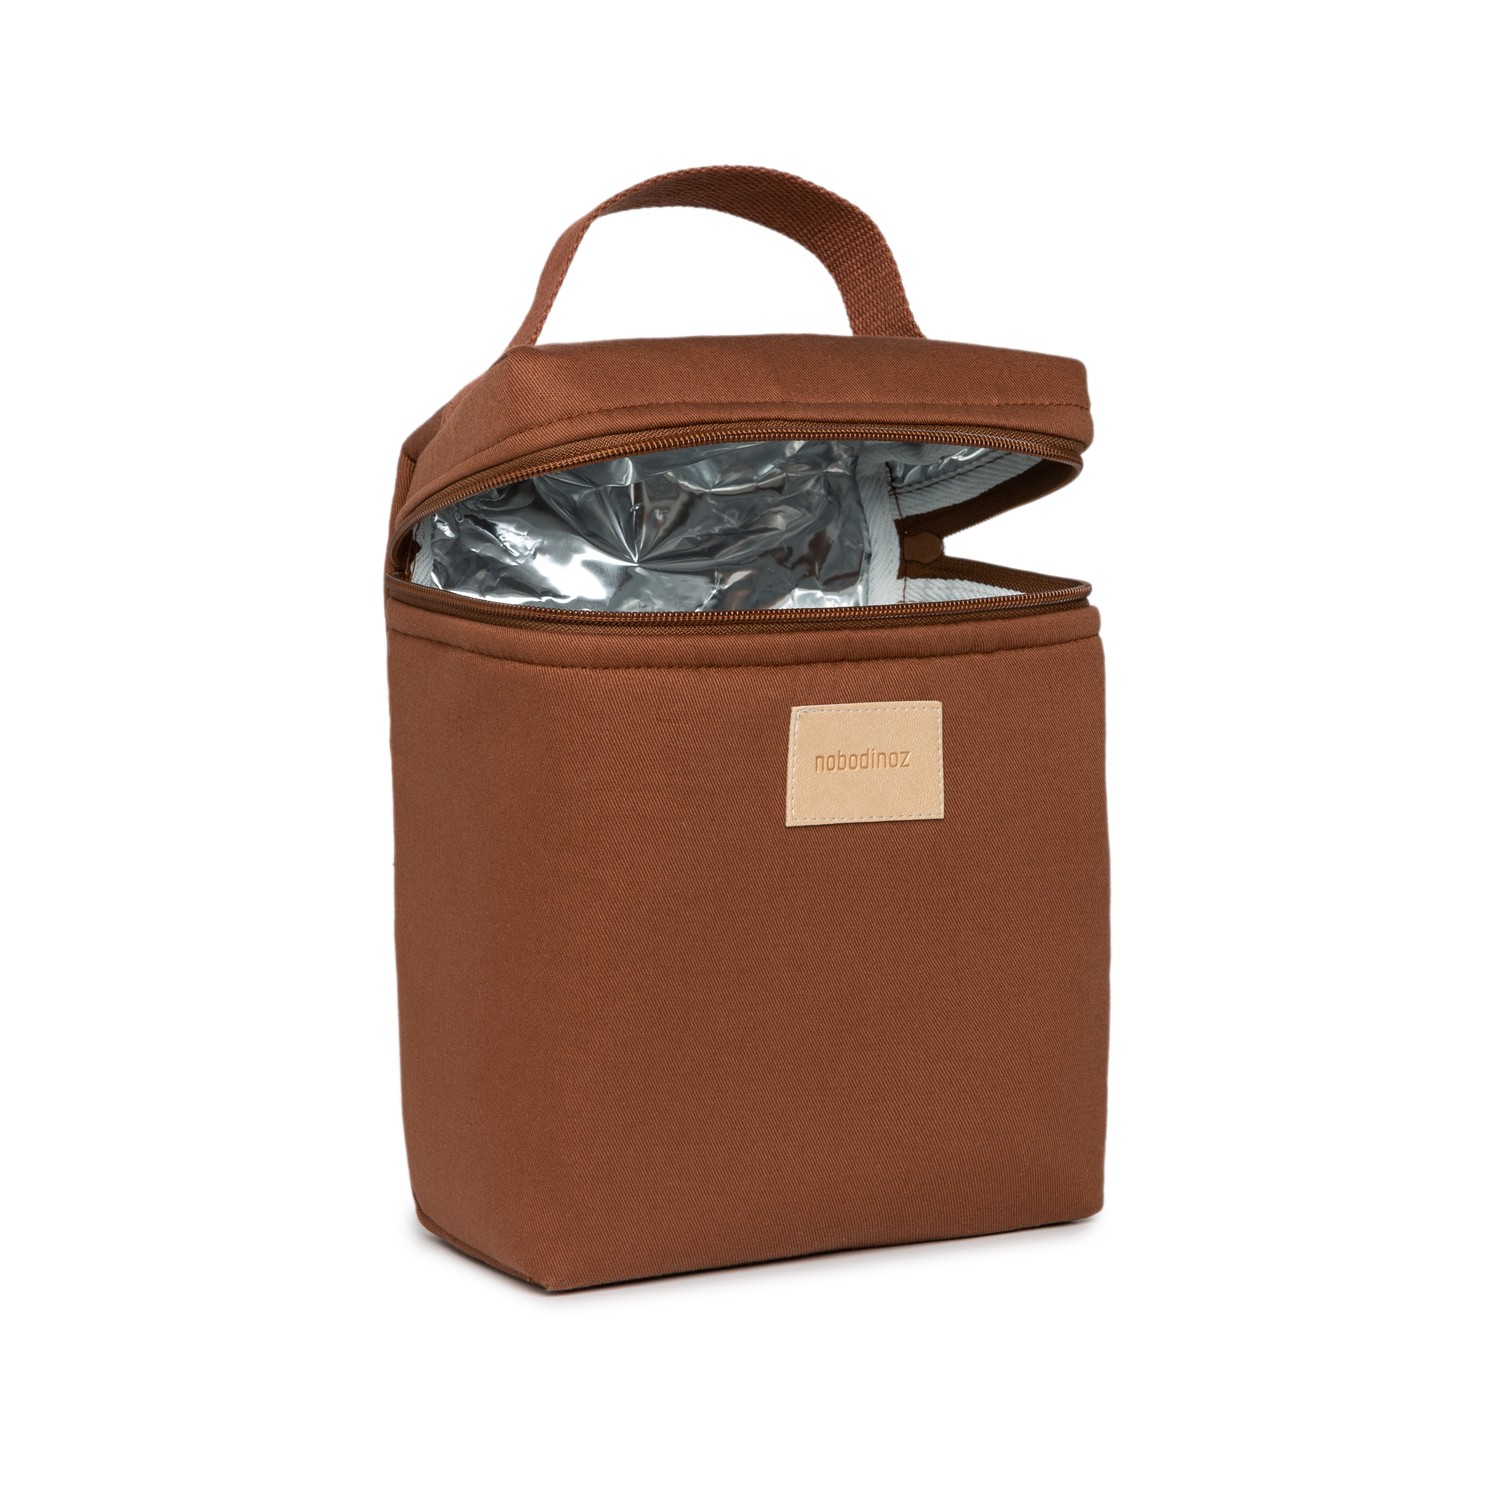 lunchbag-isotherme-baby-on-the-go-clay-brown-nobodinoz.10cqhm.max